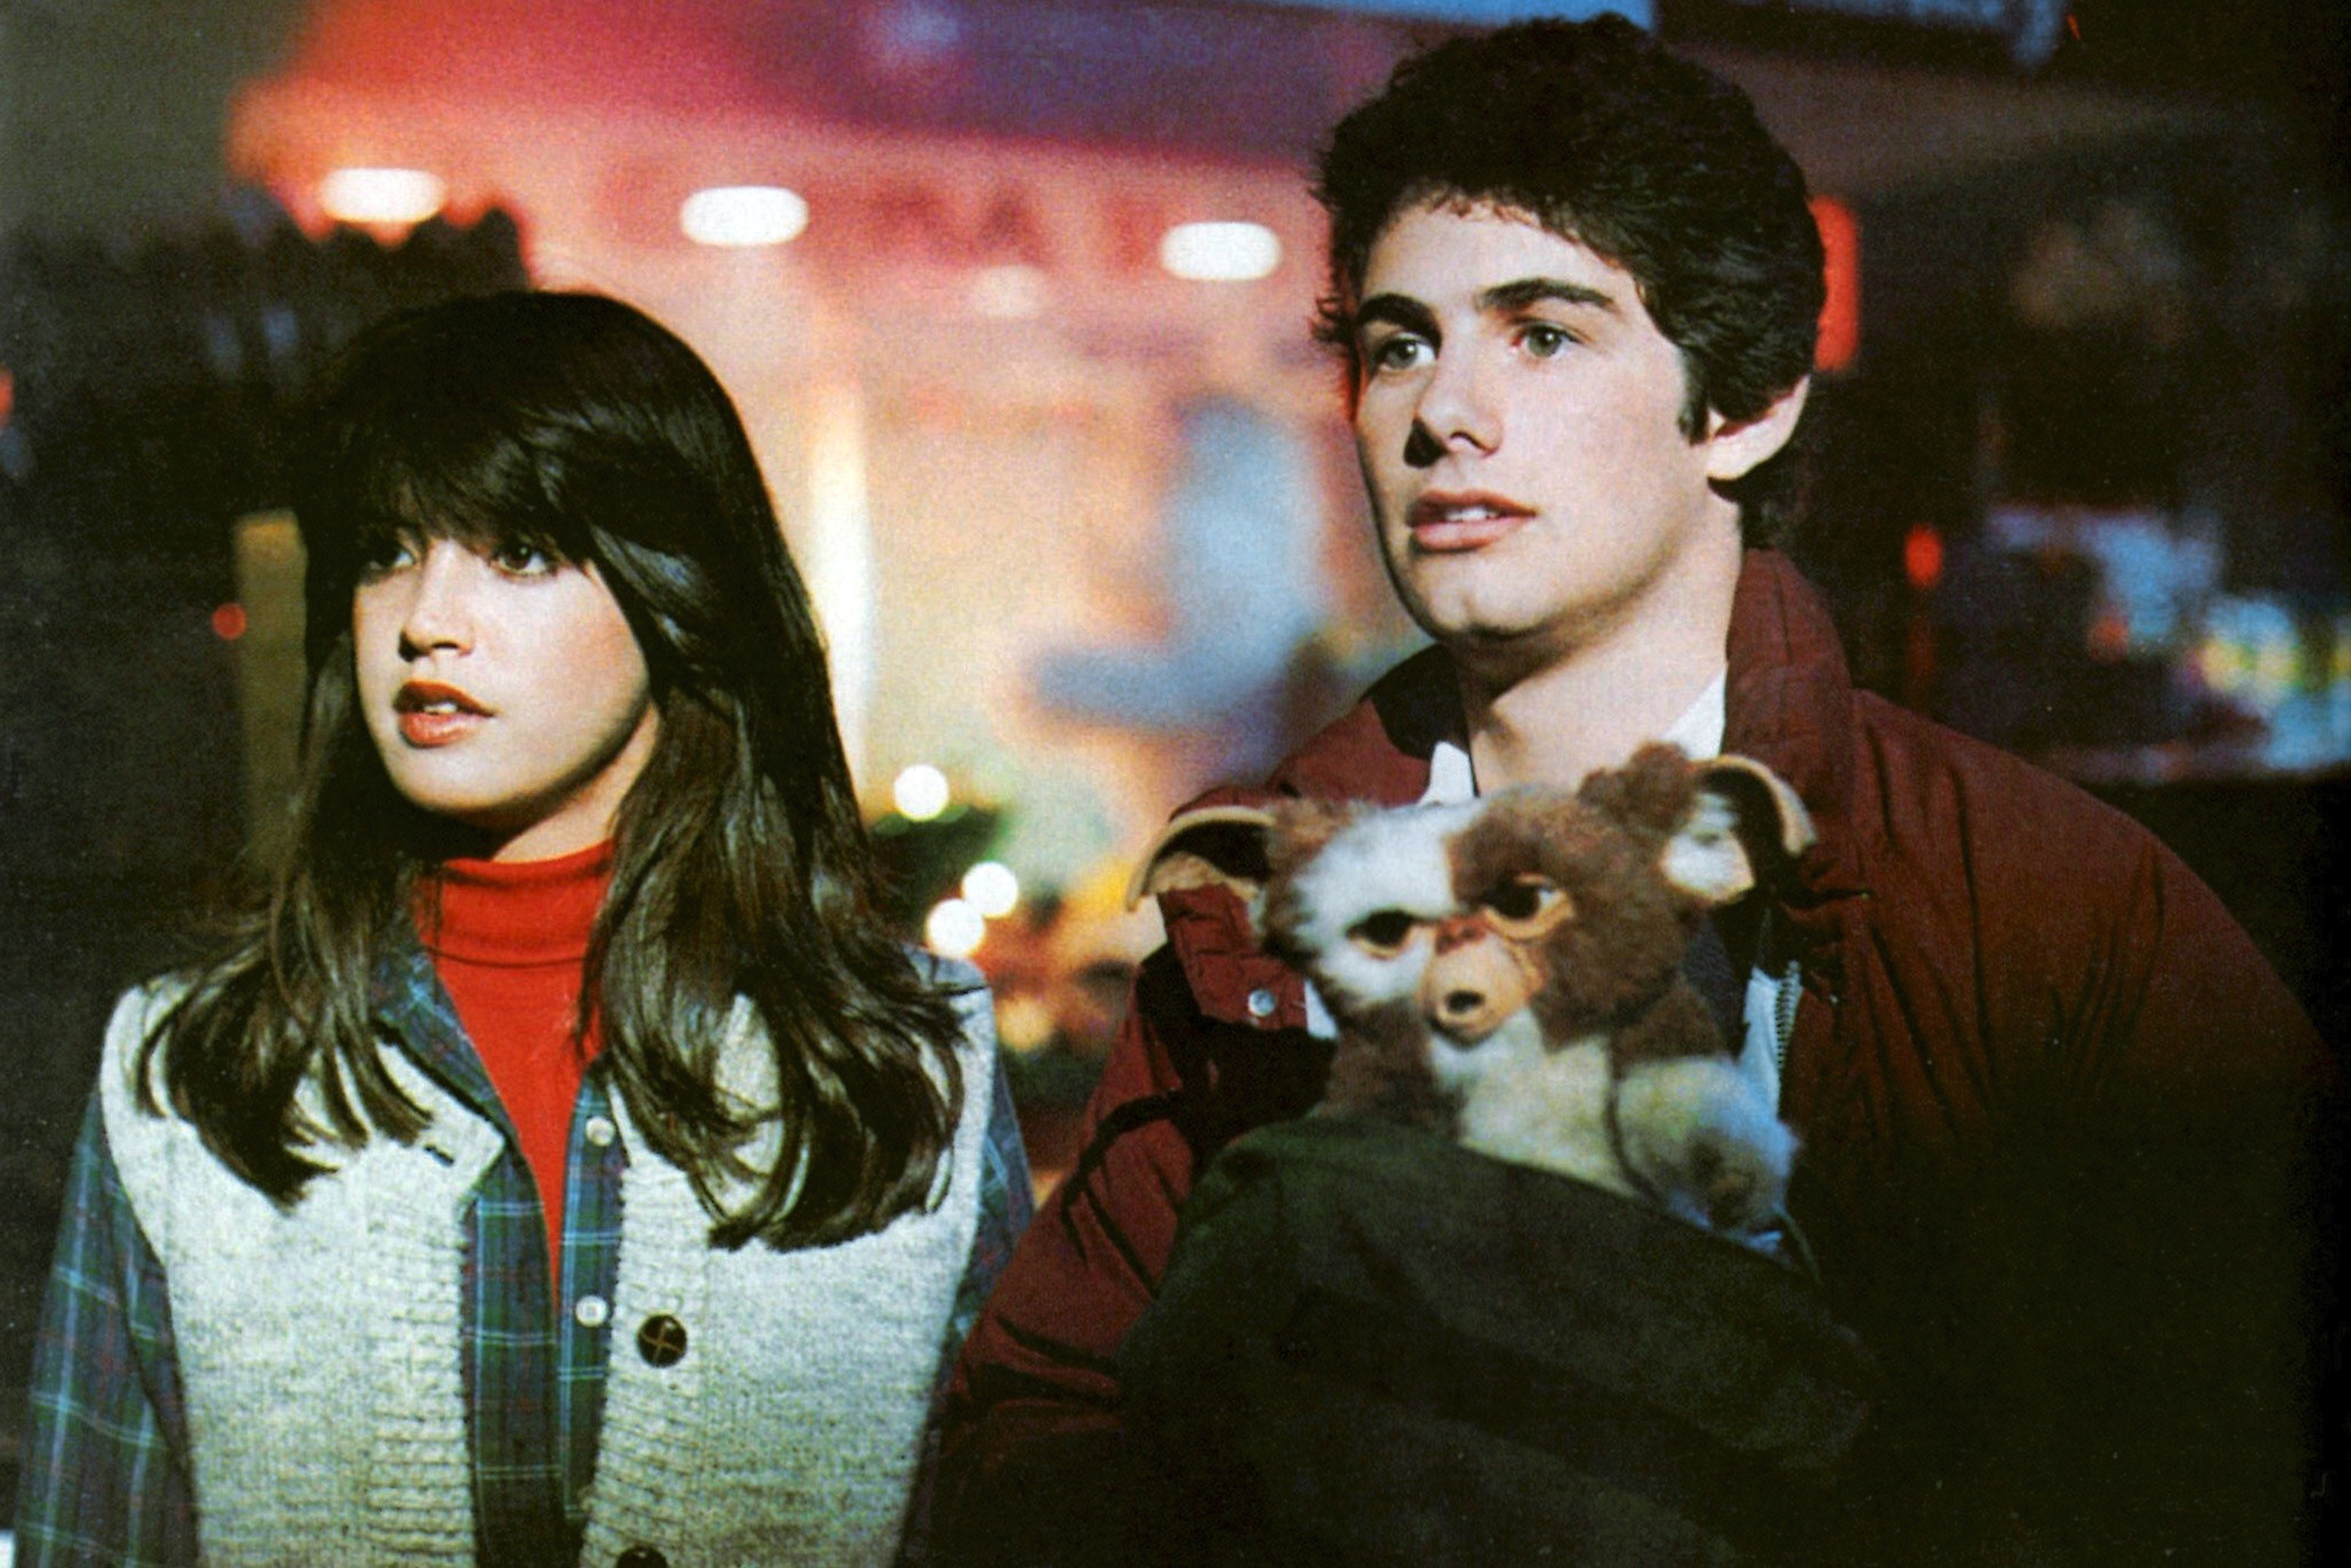 Phoebe Cates and Zach Galligan with Gizmo in Gremlins